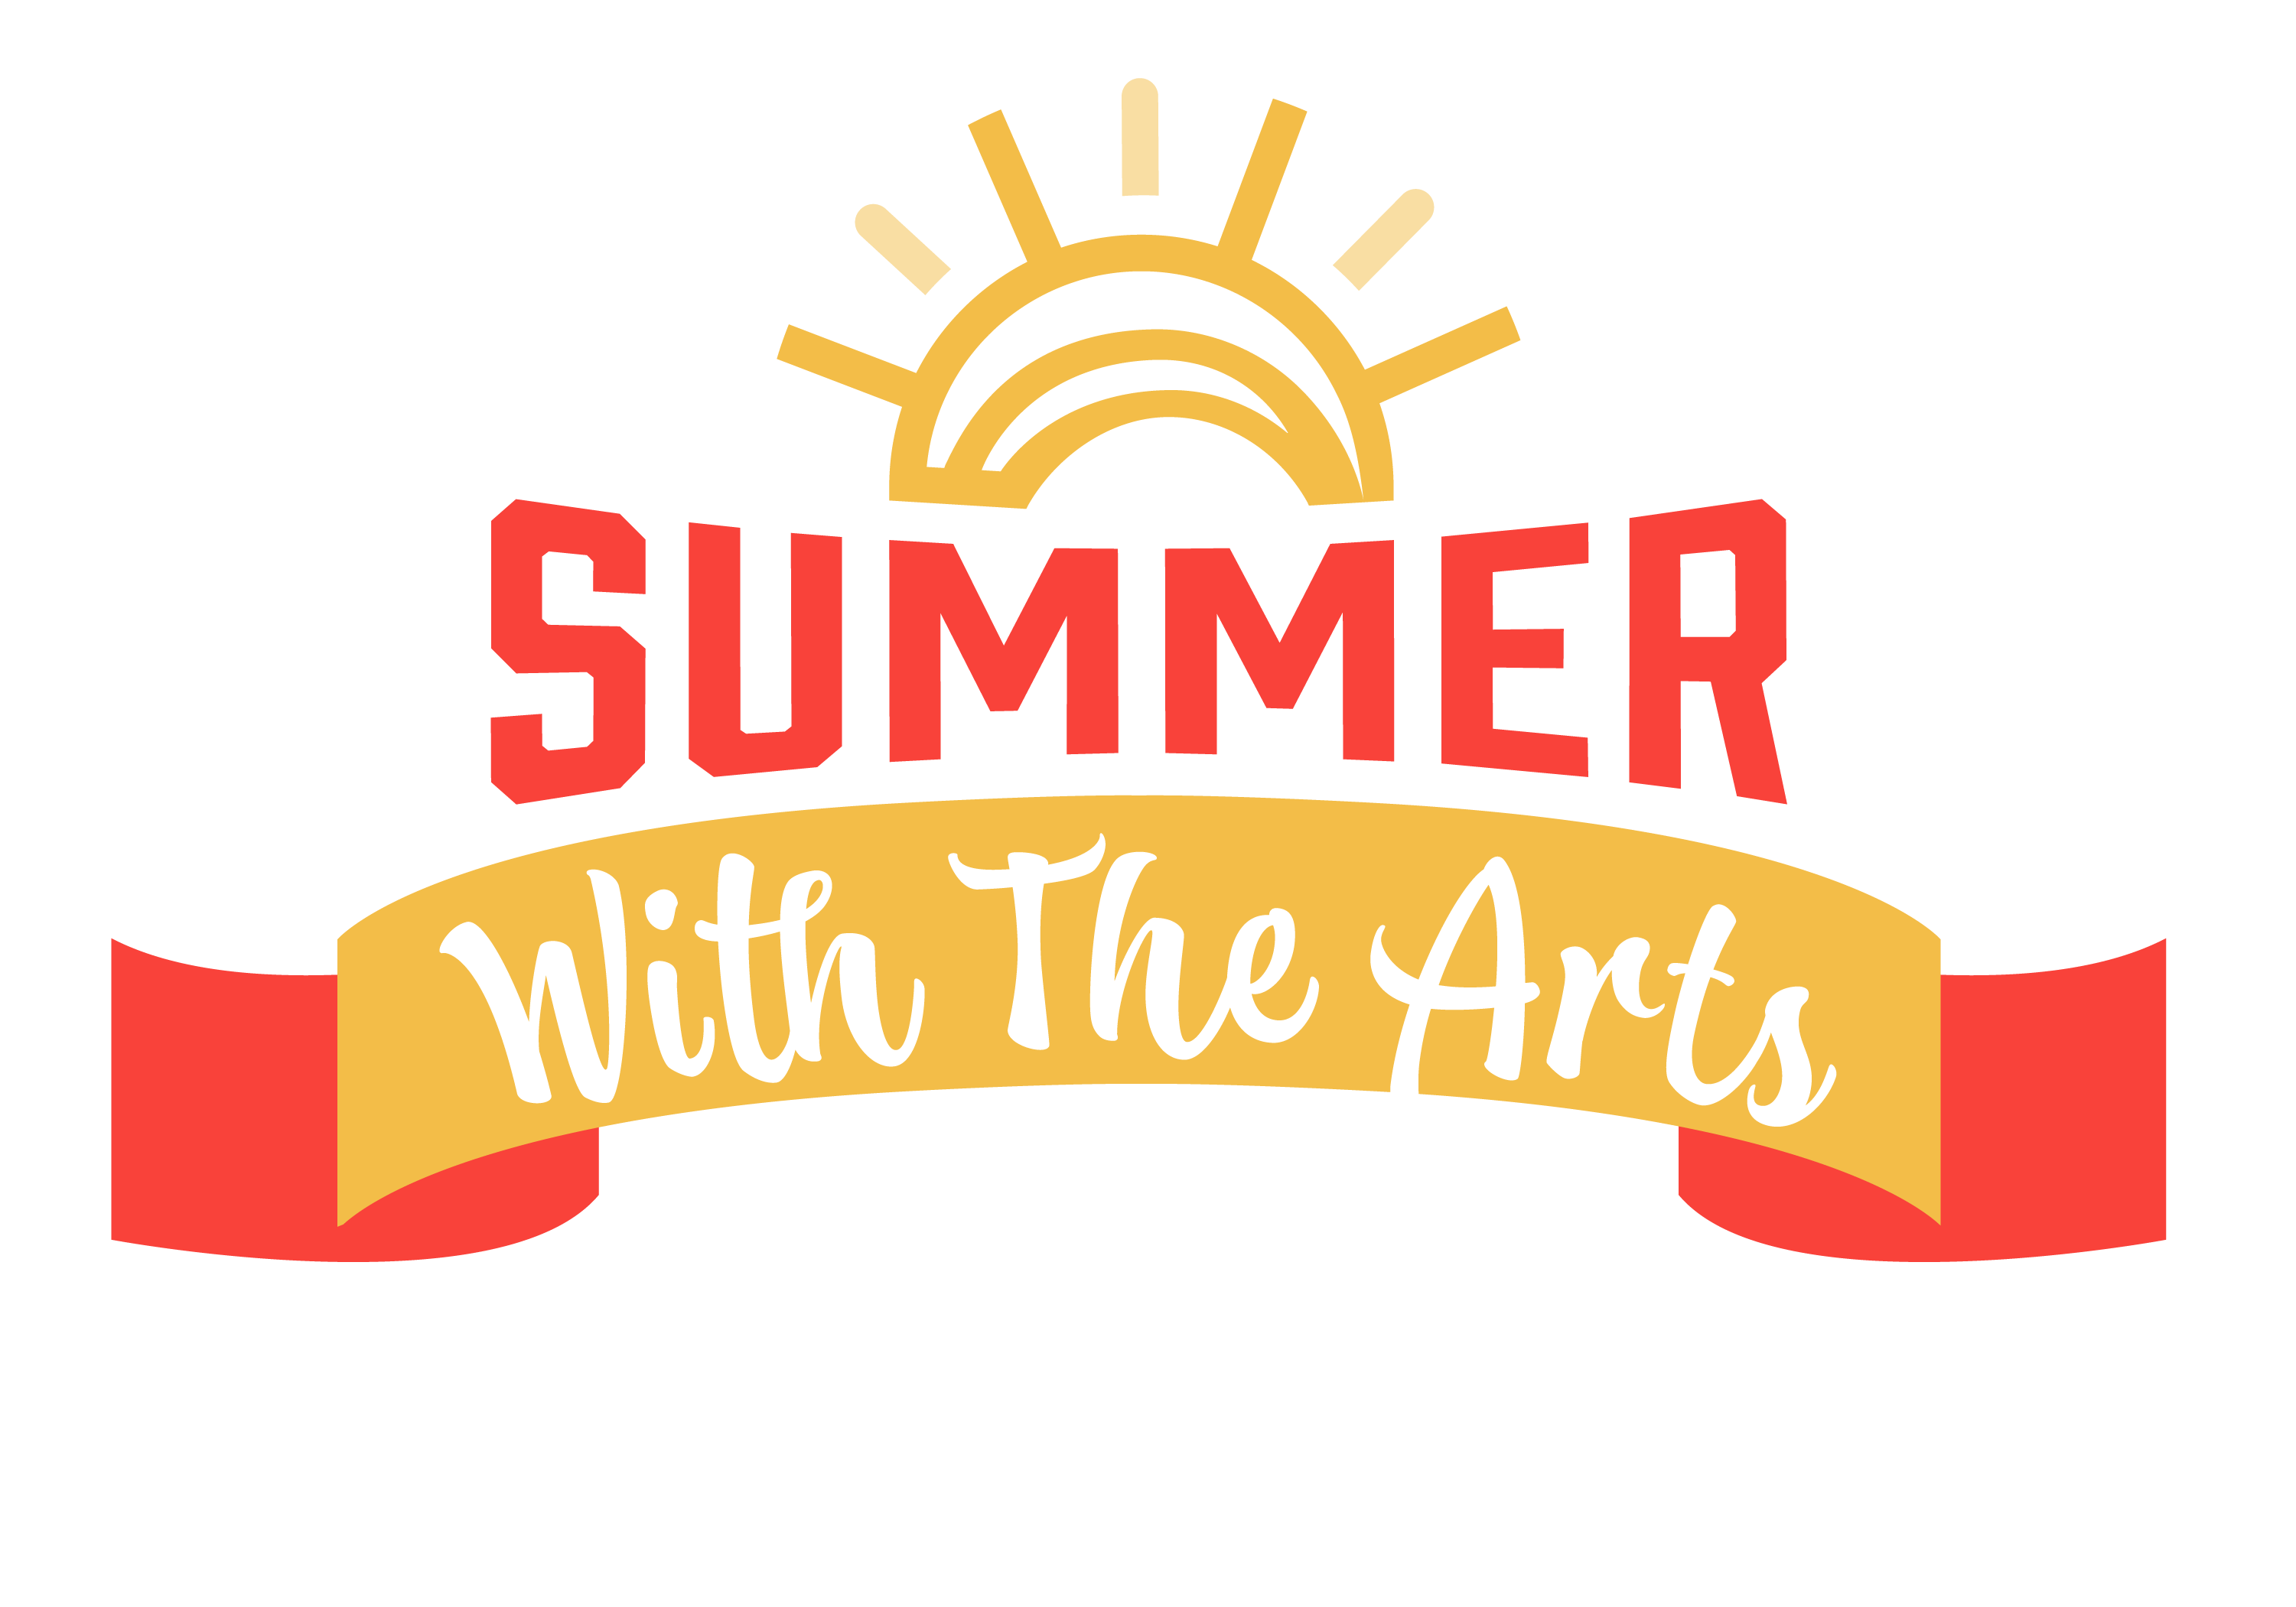 Summer With The Arts